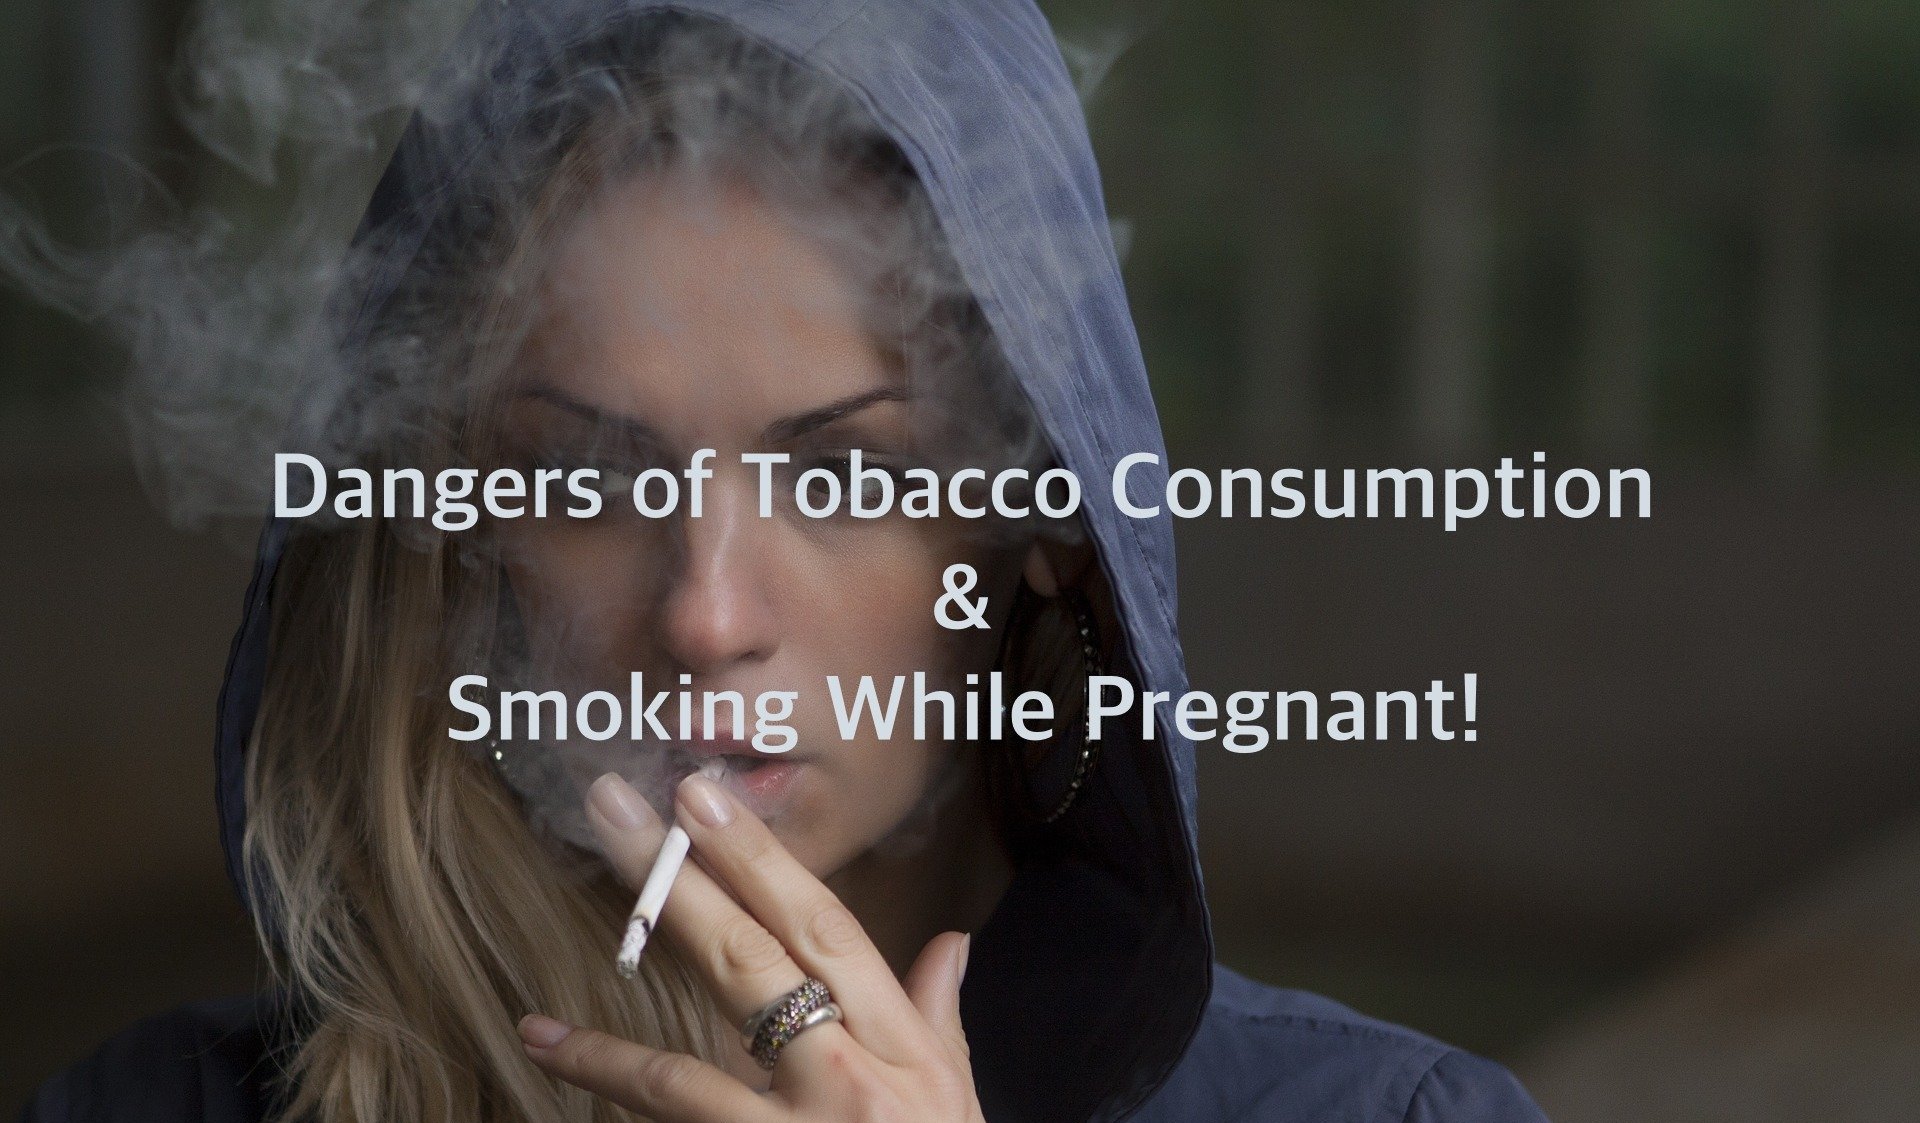 Dangers of Tobacco Consumption & Smoking While Pregnant!